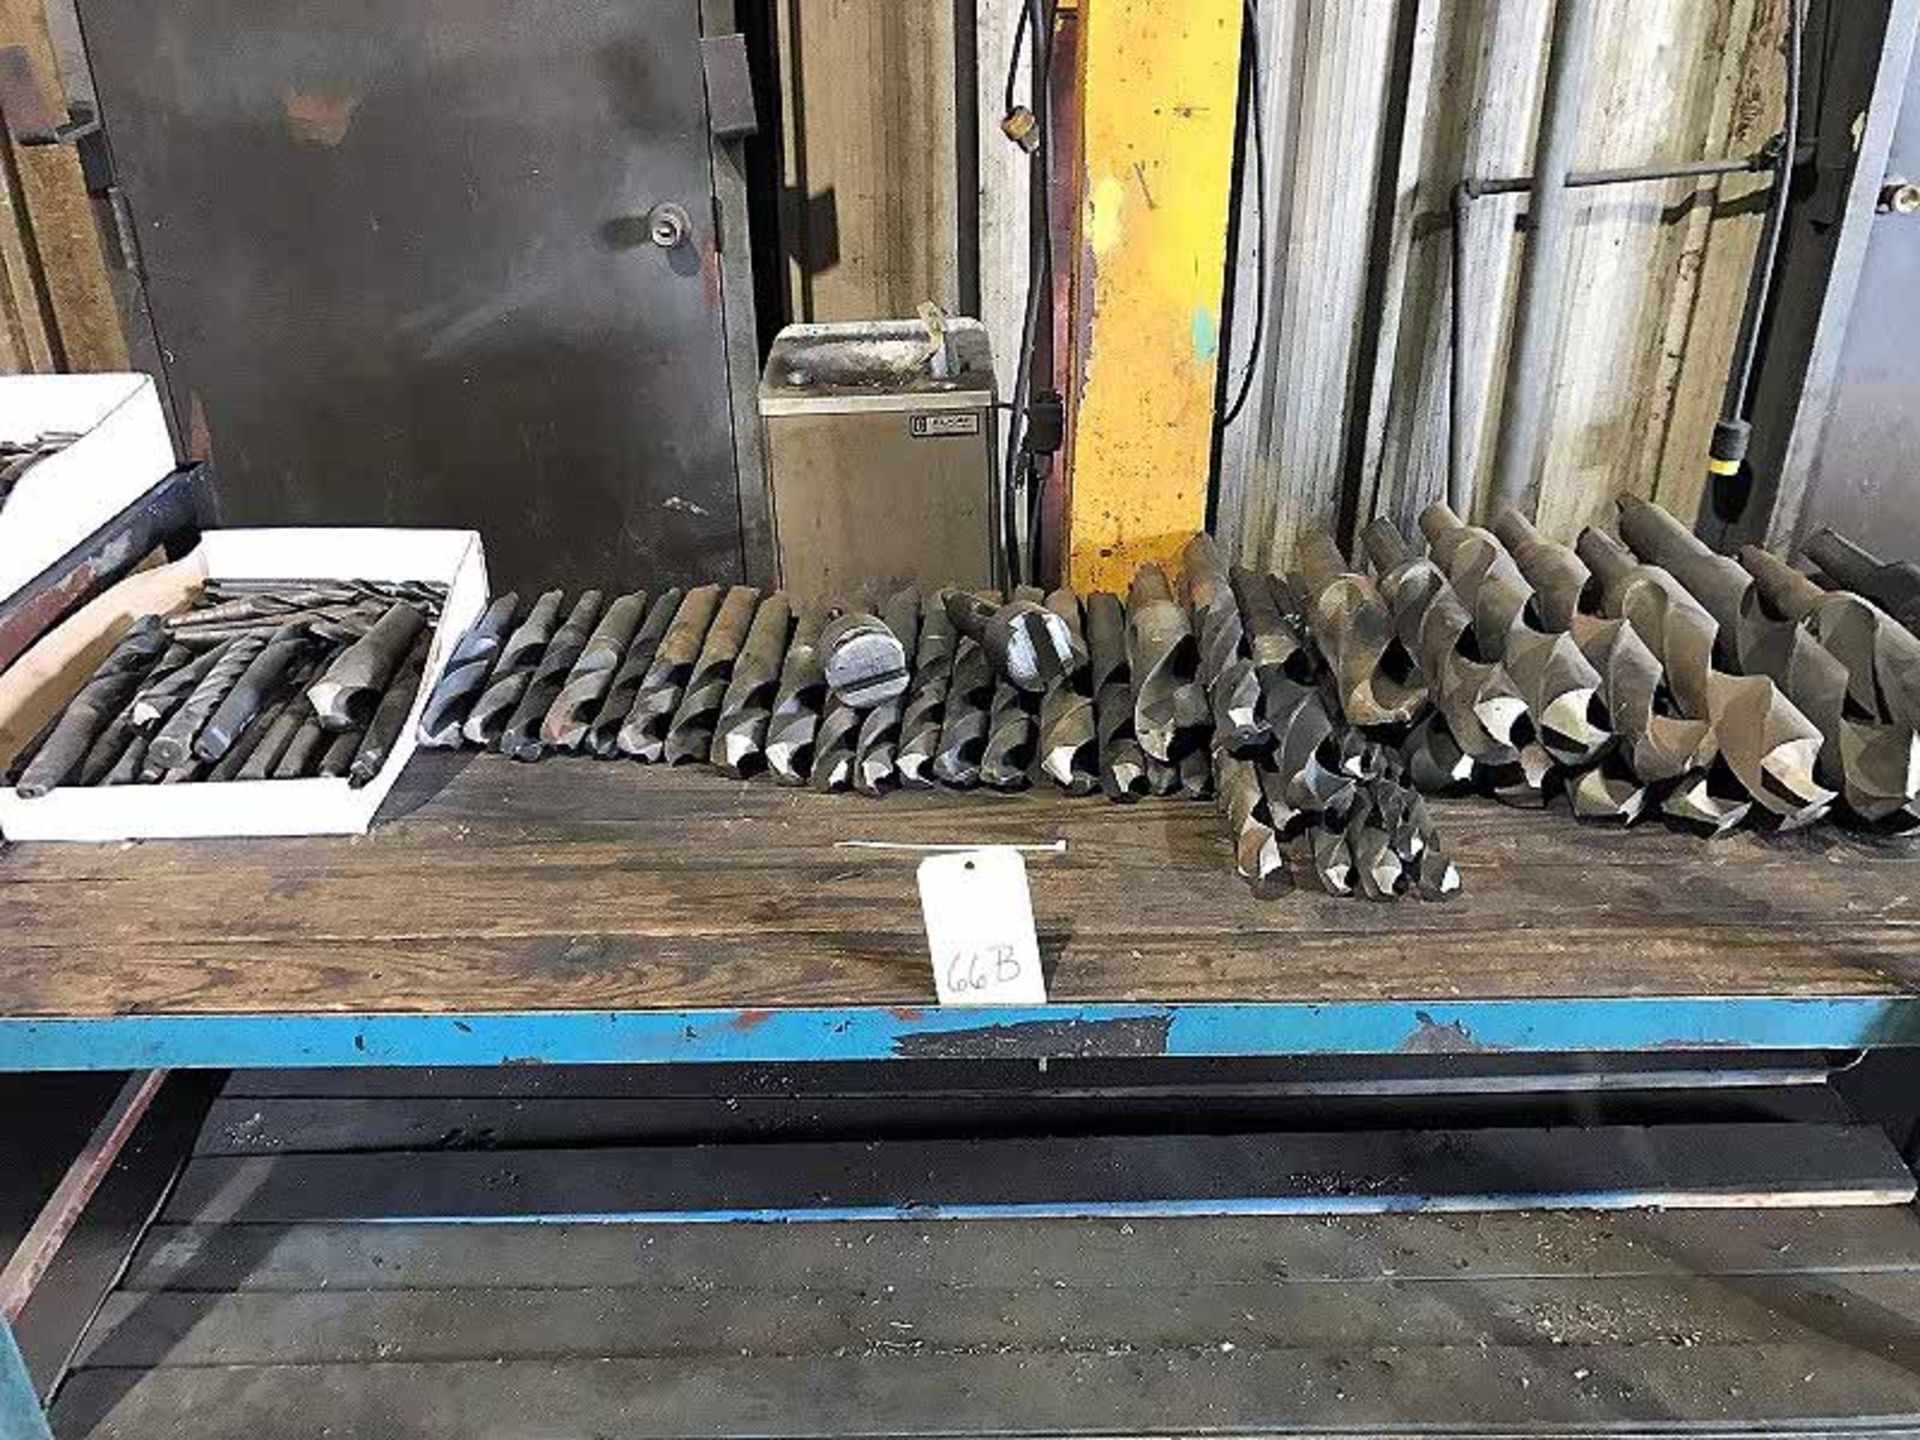 LOT OF DRILLS, up to 30" dia. (must be removed by April 13) (Location 10)